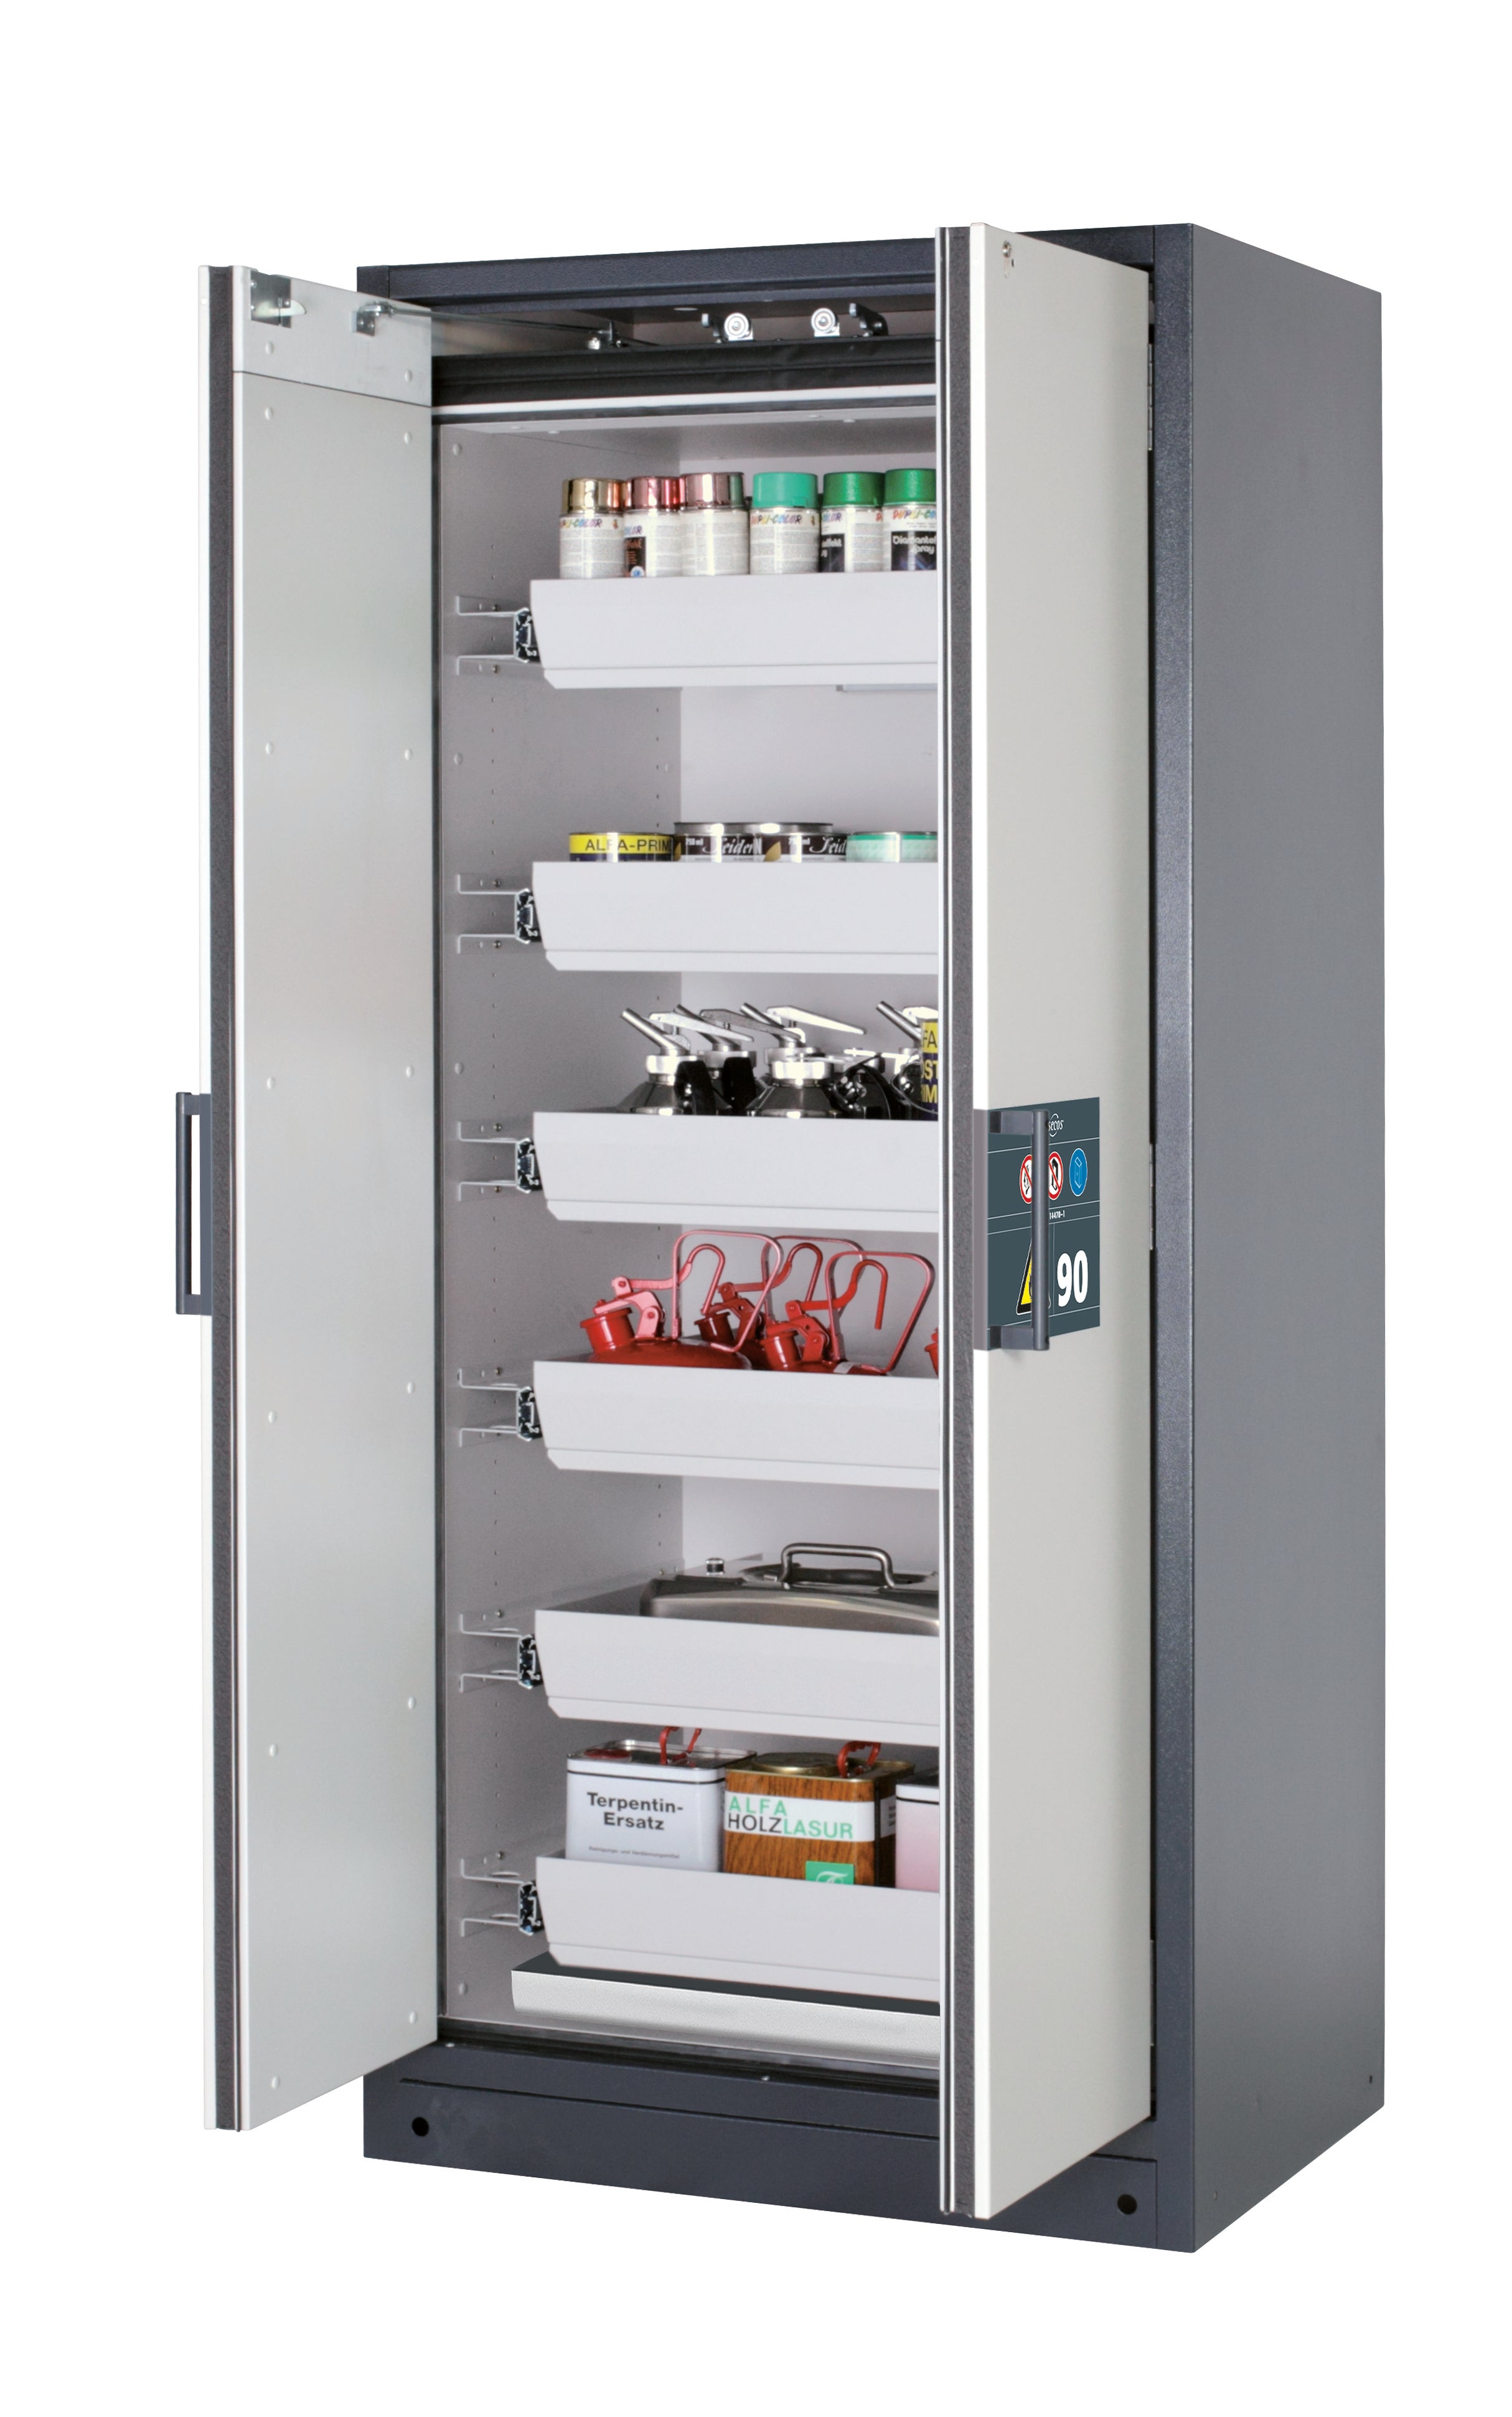 Type 90 safety storage cabinet Q-CLASSIC-90 model Q90.195.090 in light grey RAL 7035 with 6x drawer (standard) (sheet steel),